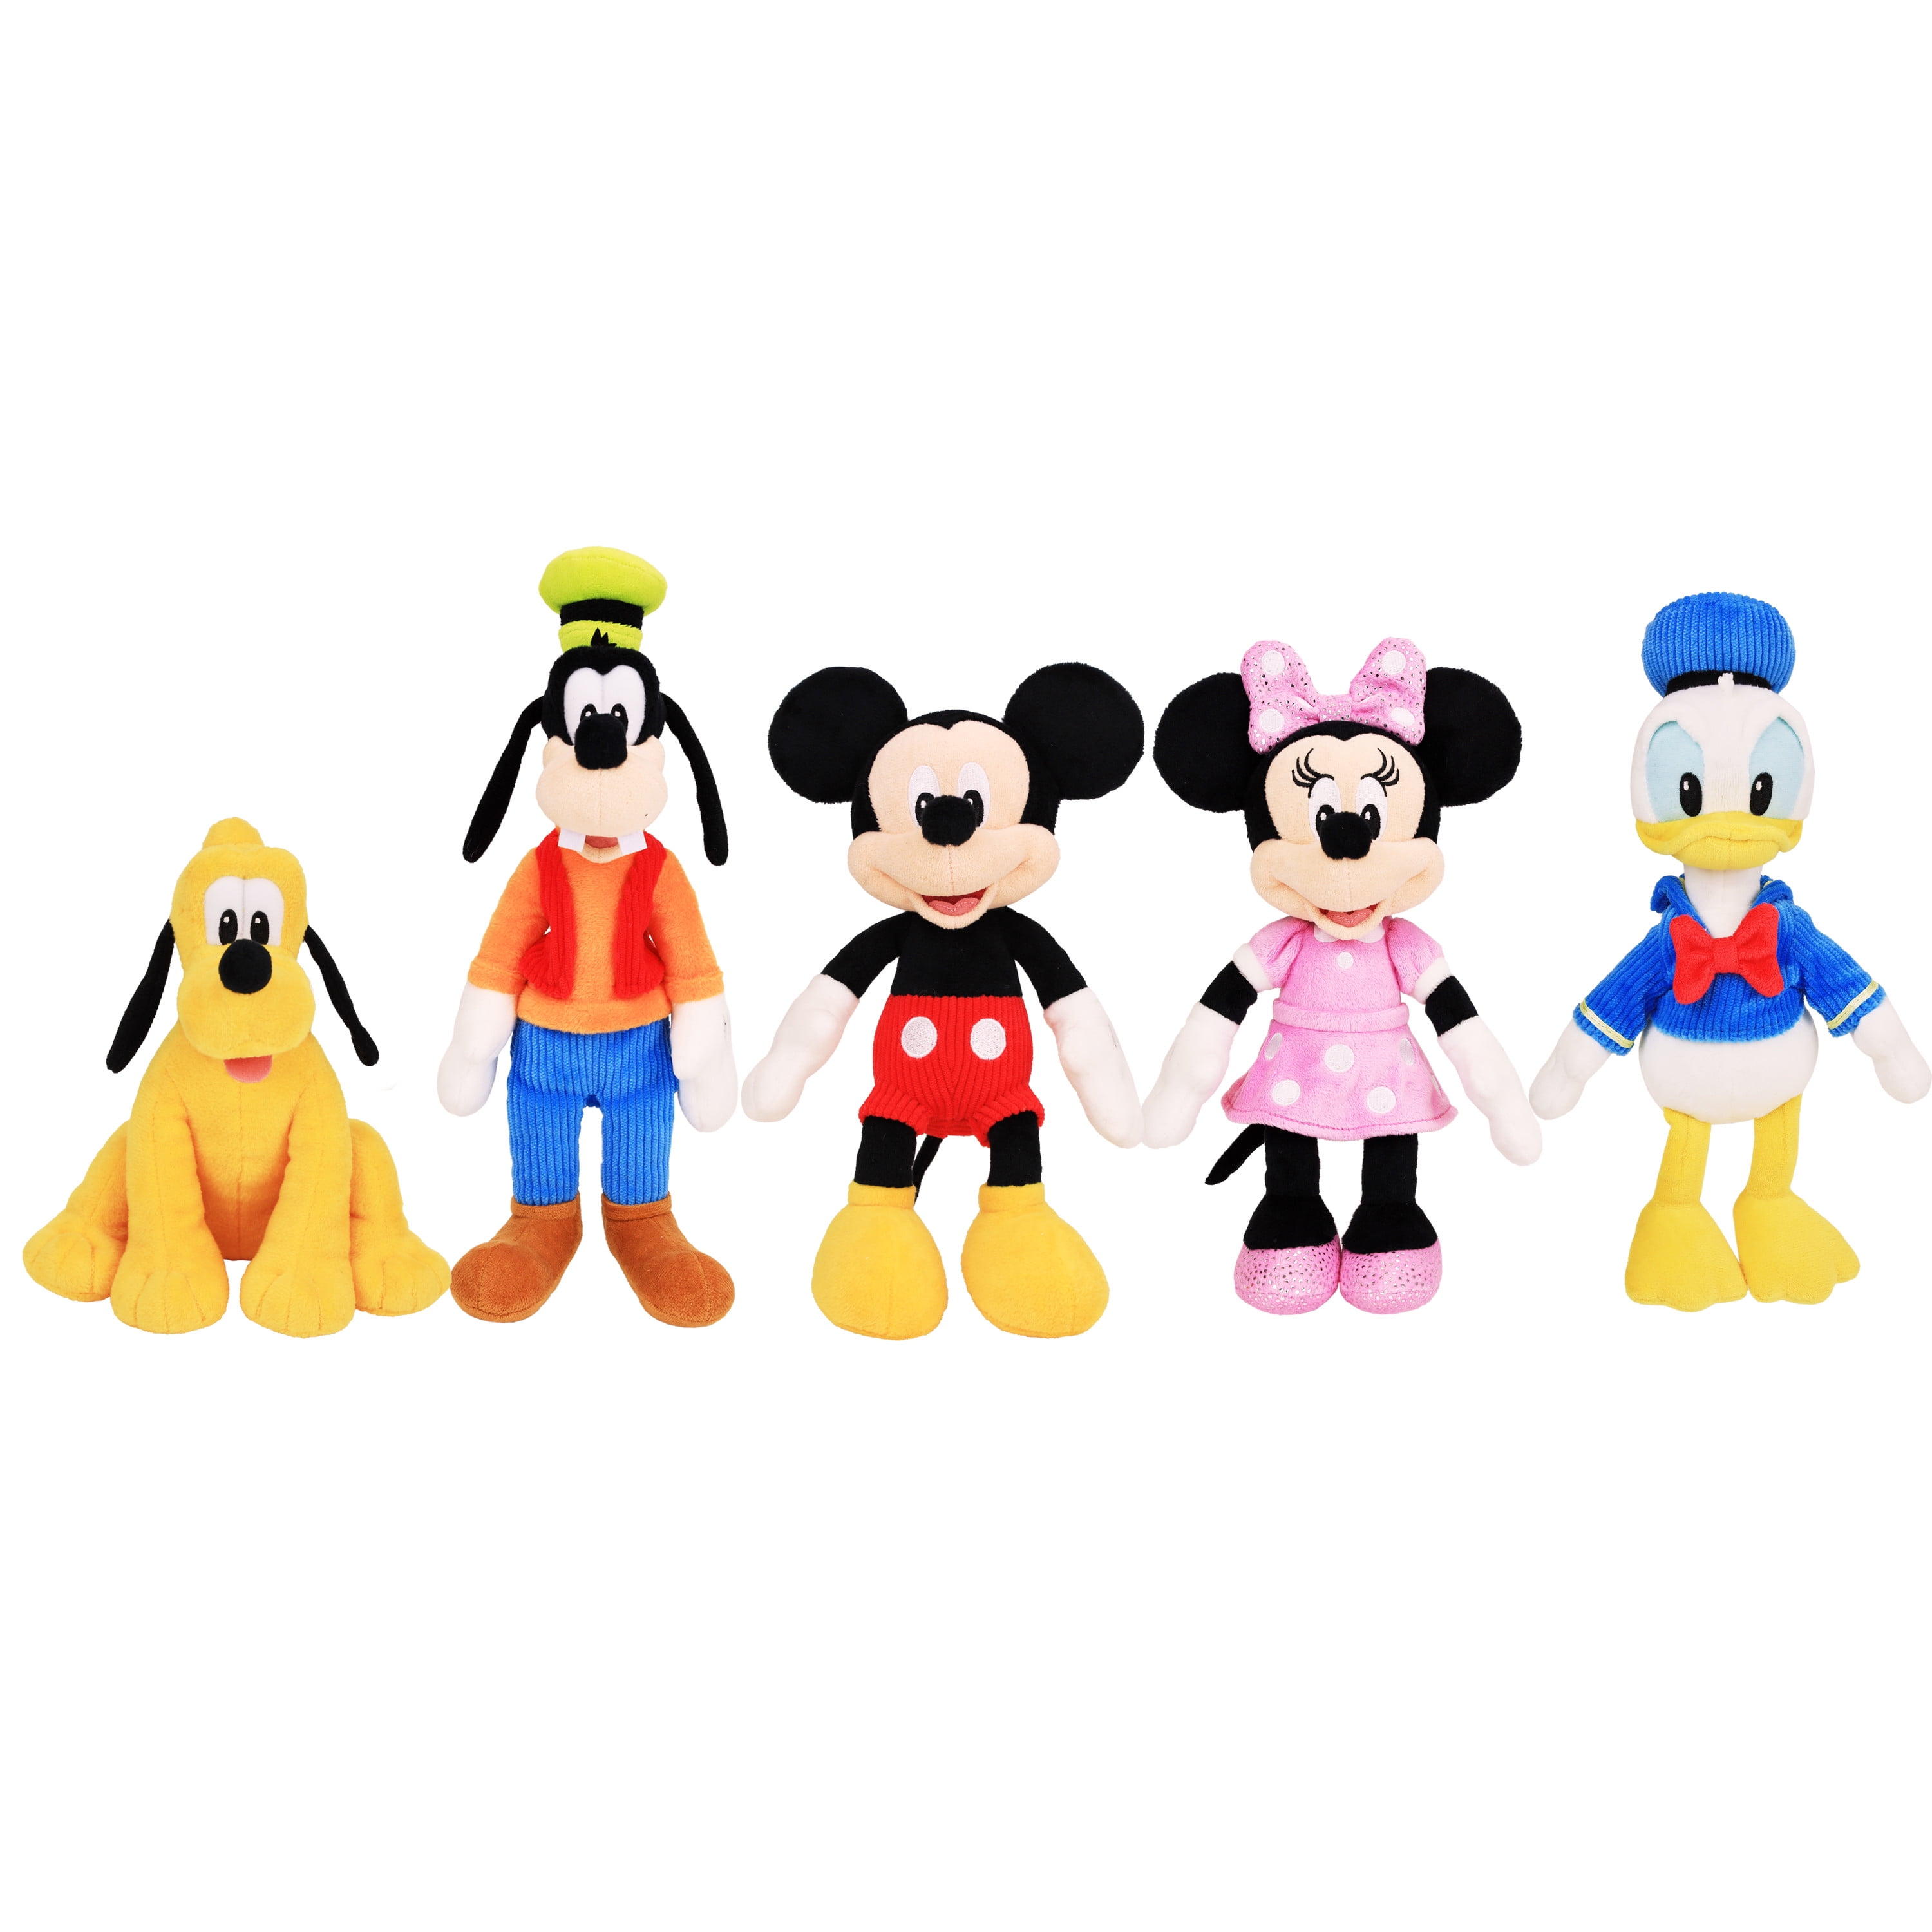 Buy Mickey Mouse Clubhouse 9-inch Plush 5-pack, Mickey Mouse, Minnie